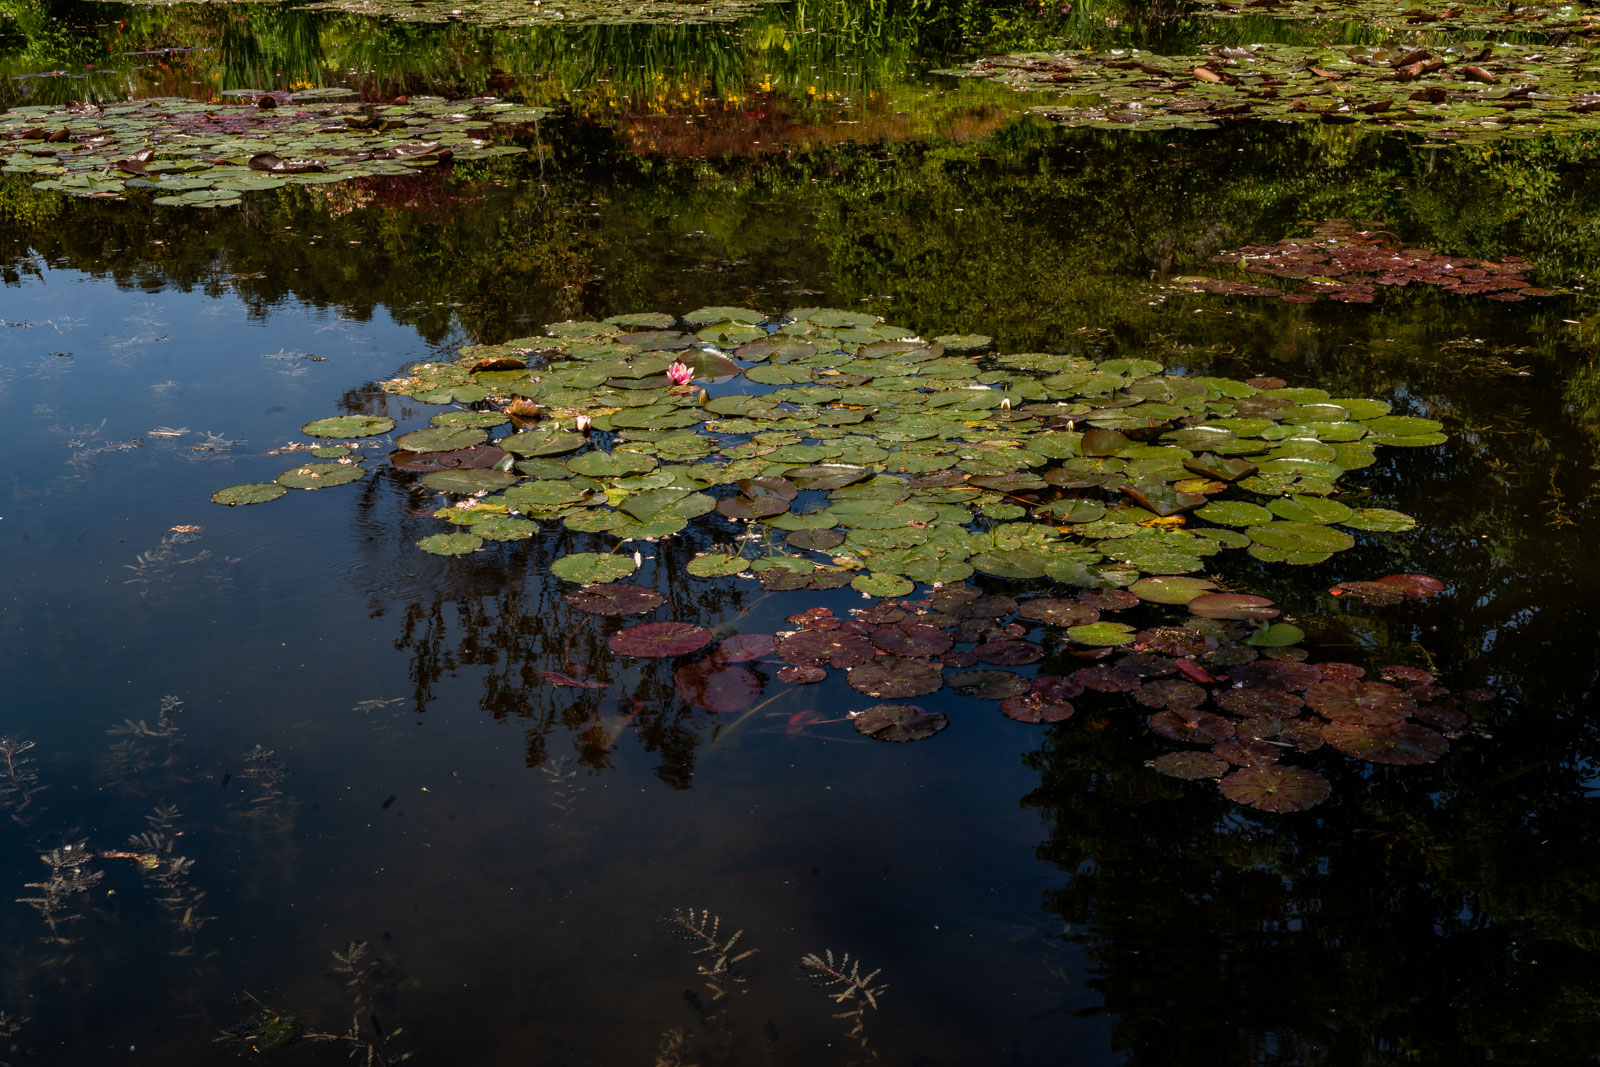 The pond at Claude Monet house